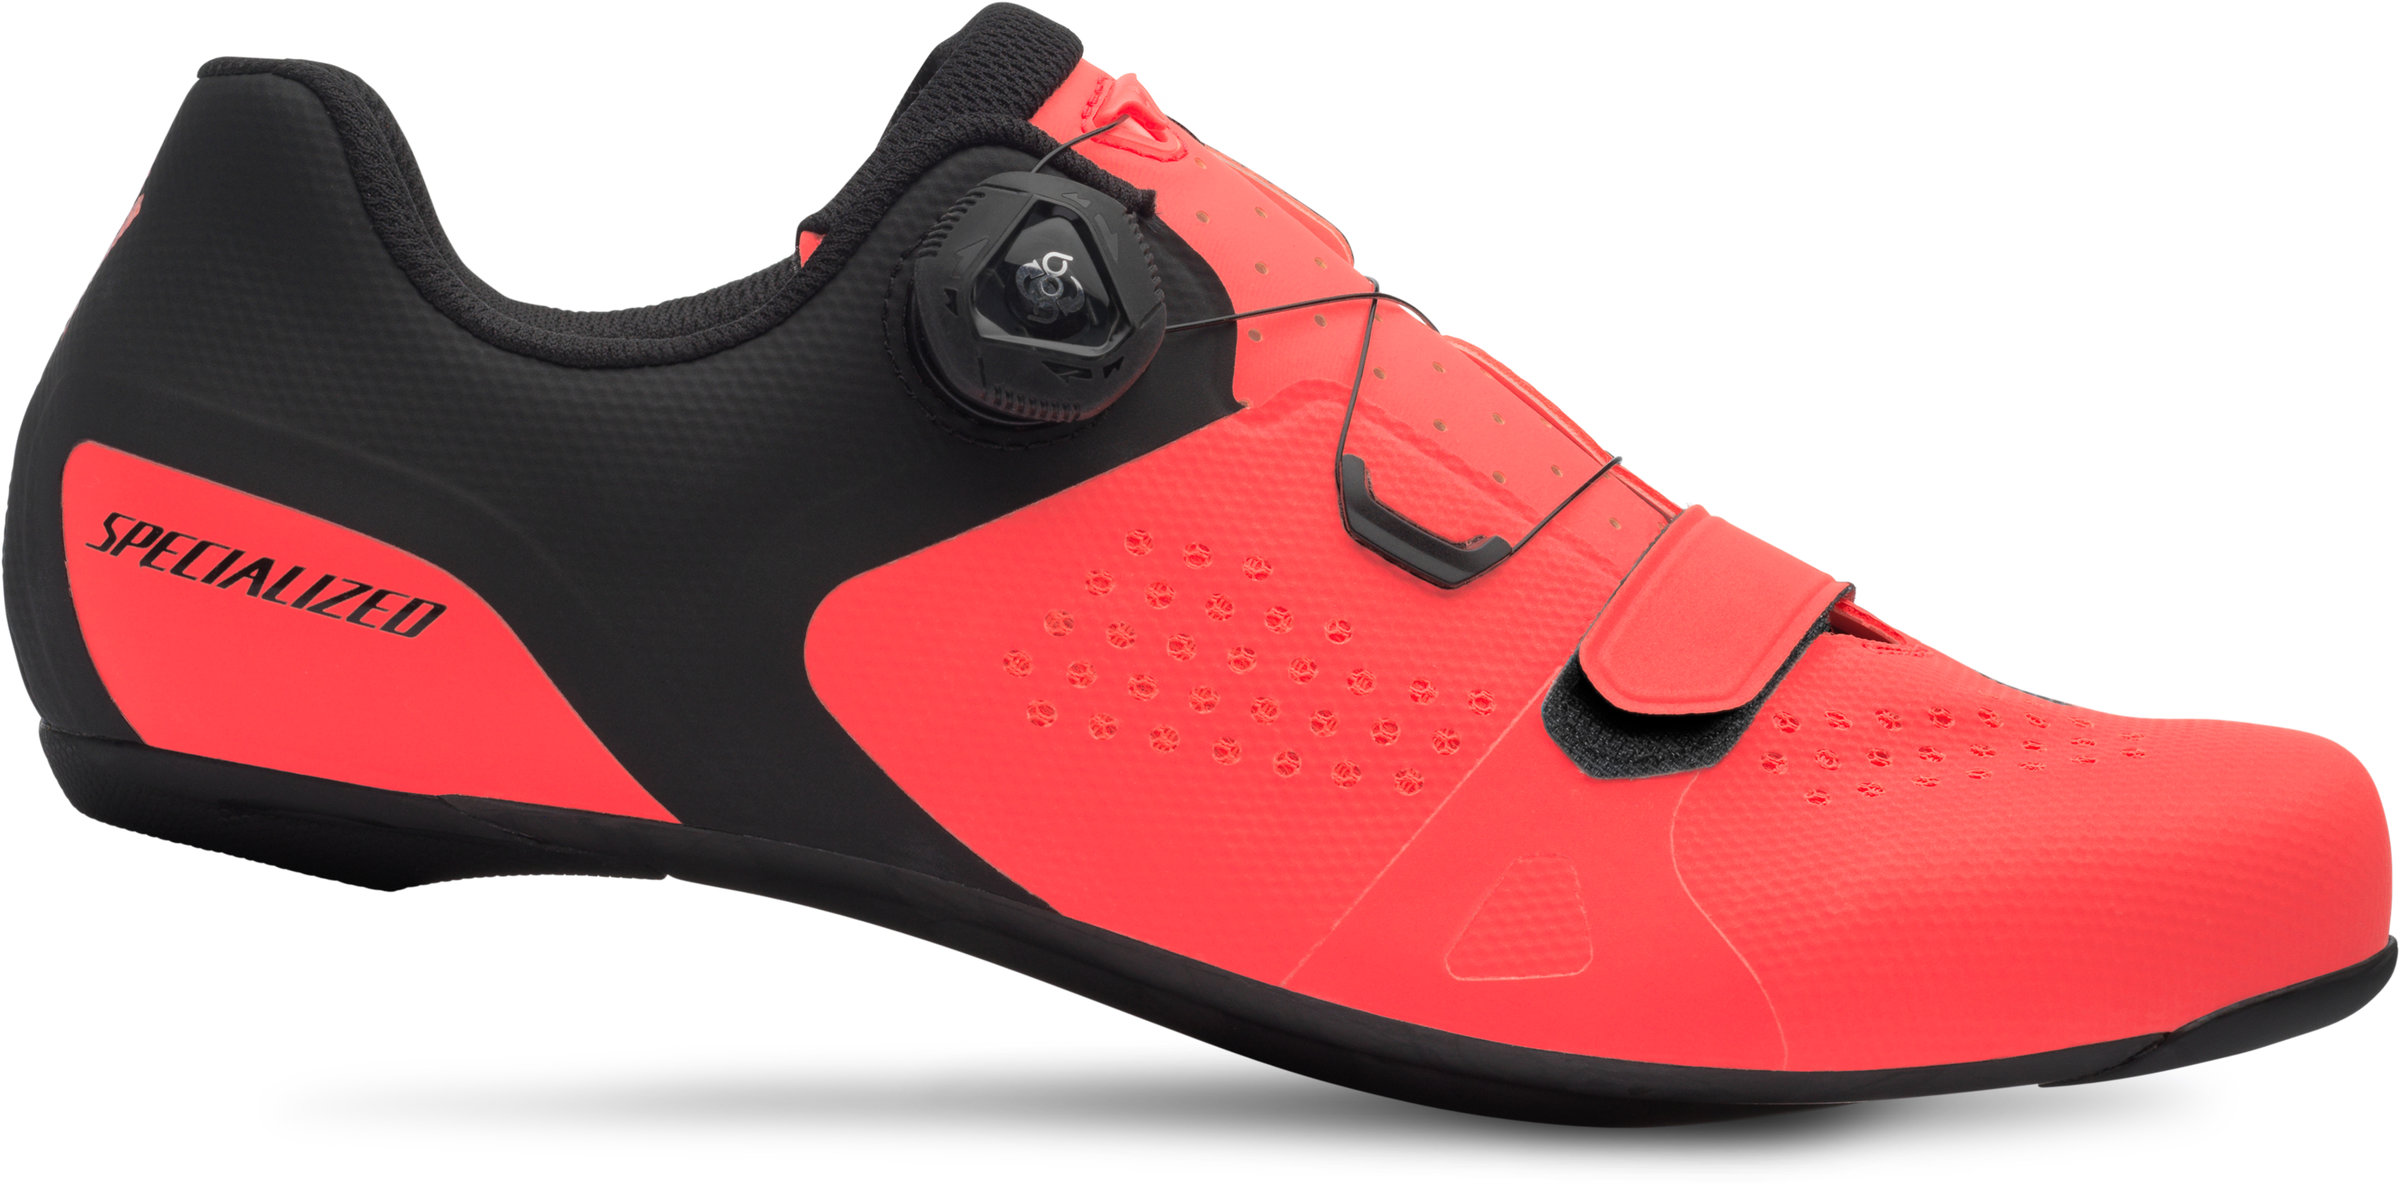 Specialized Torch 2.0 Road Shoes 